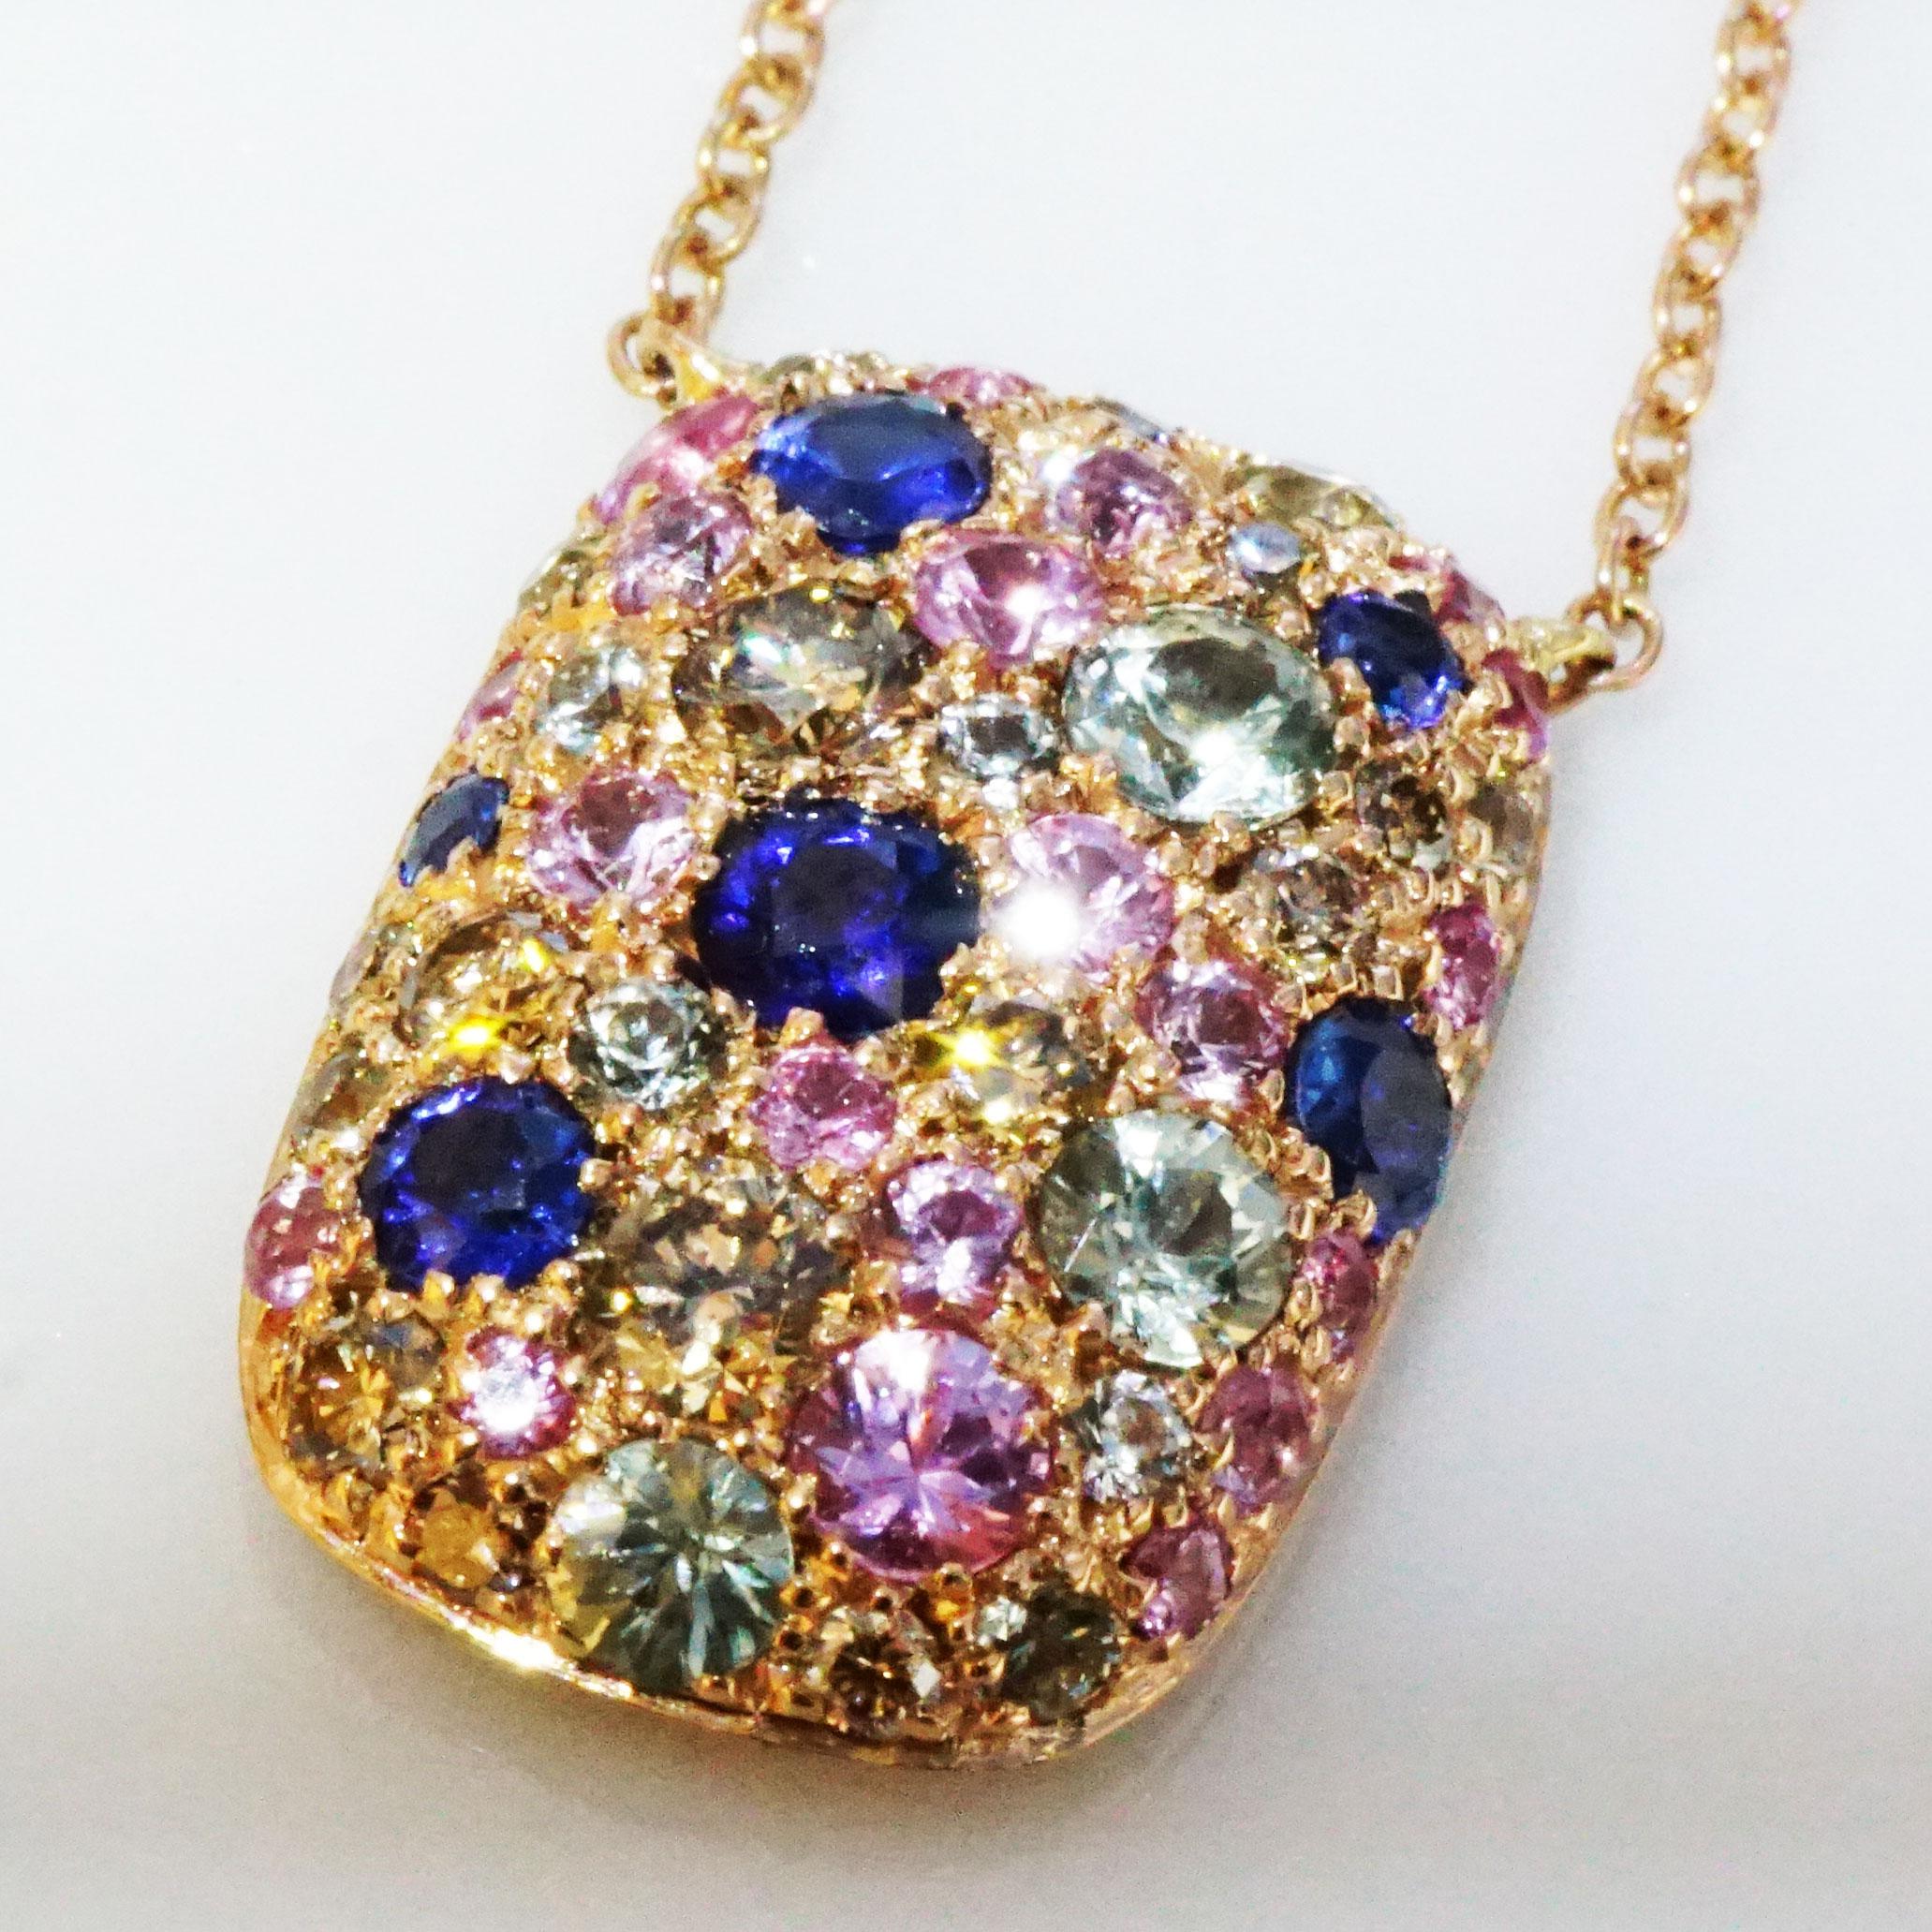 a sapphire necklace to marvel at a wonderful play of colors from blue, pink and green sapphires (treated) total approx. 1.06 ct combined with fine light brown full-cut brilliant-cut diamonds total approx. 0.26 ct, pavee set as an area of ​​15 x 11 x